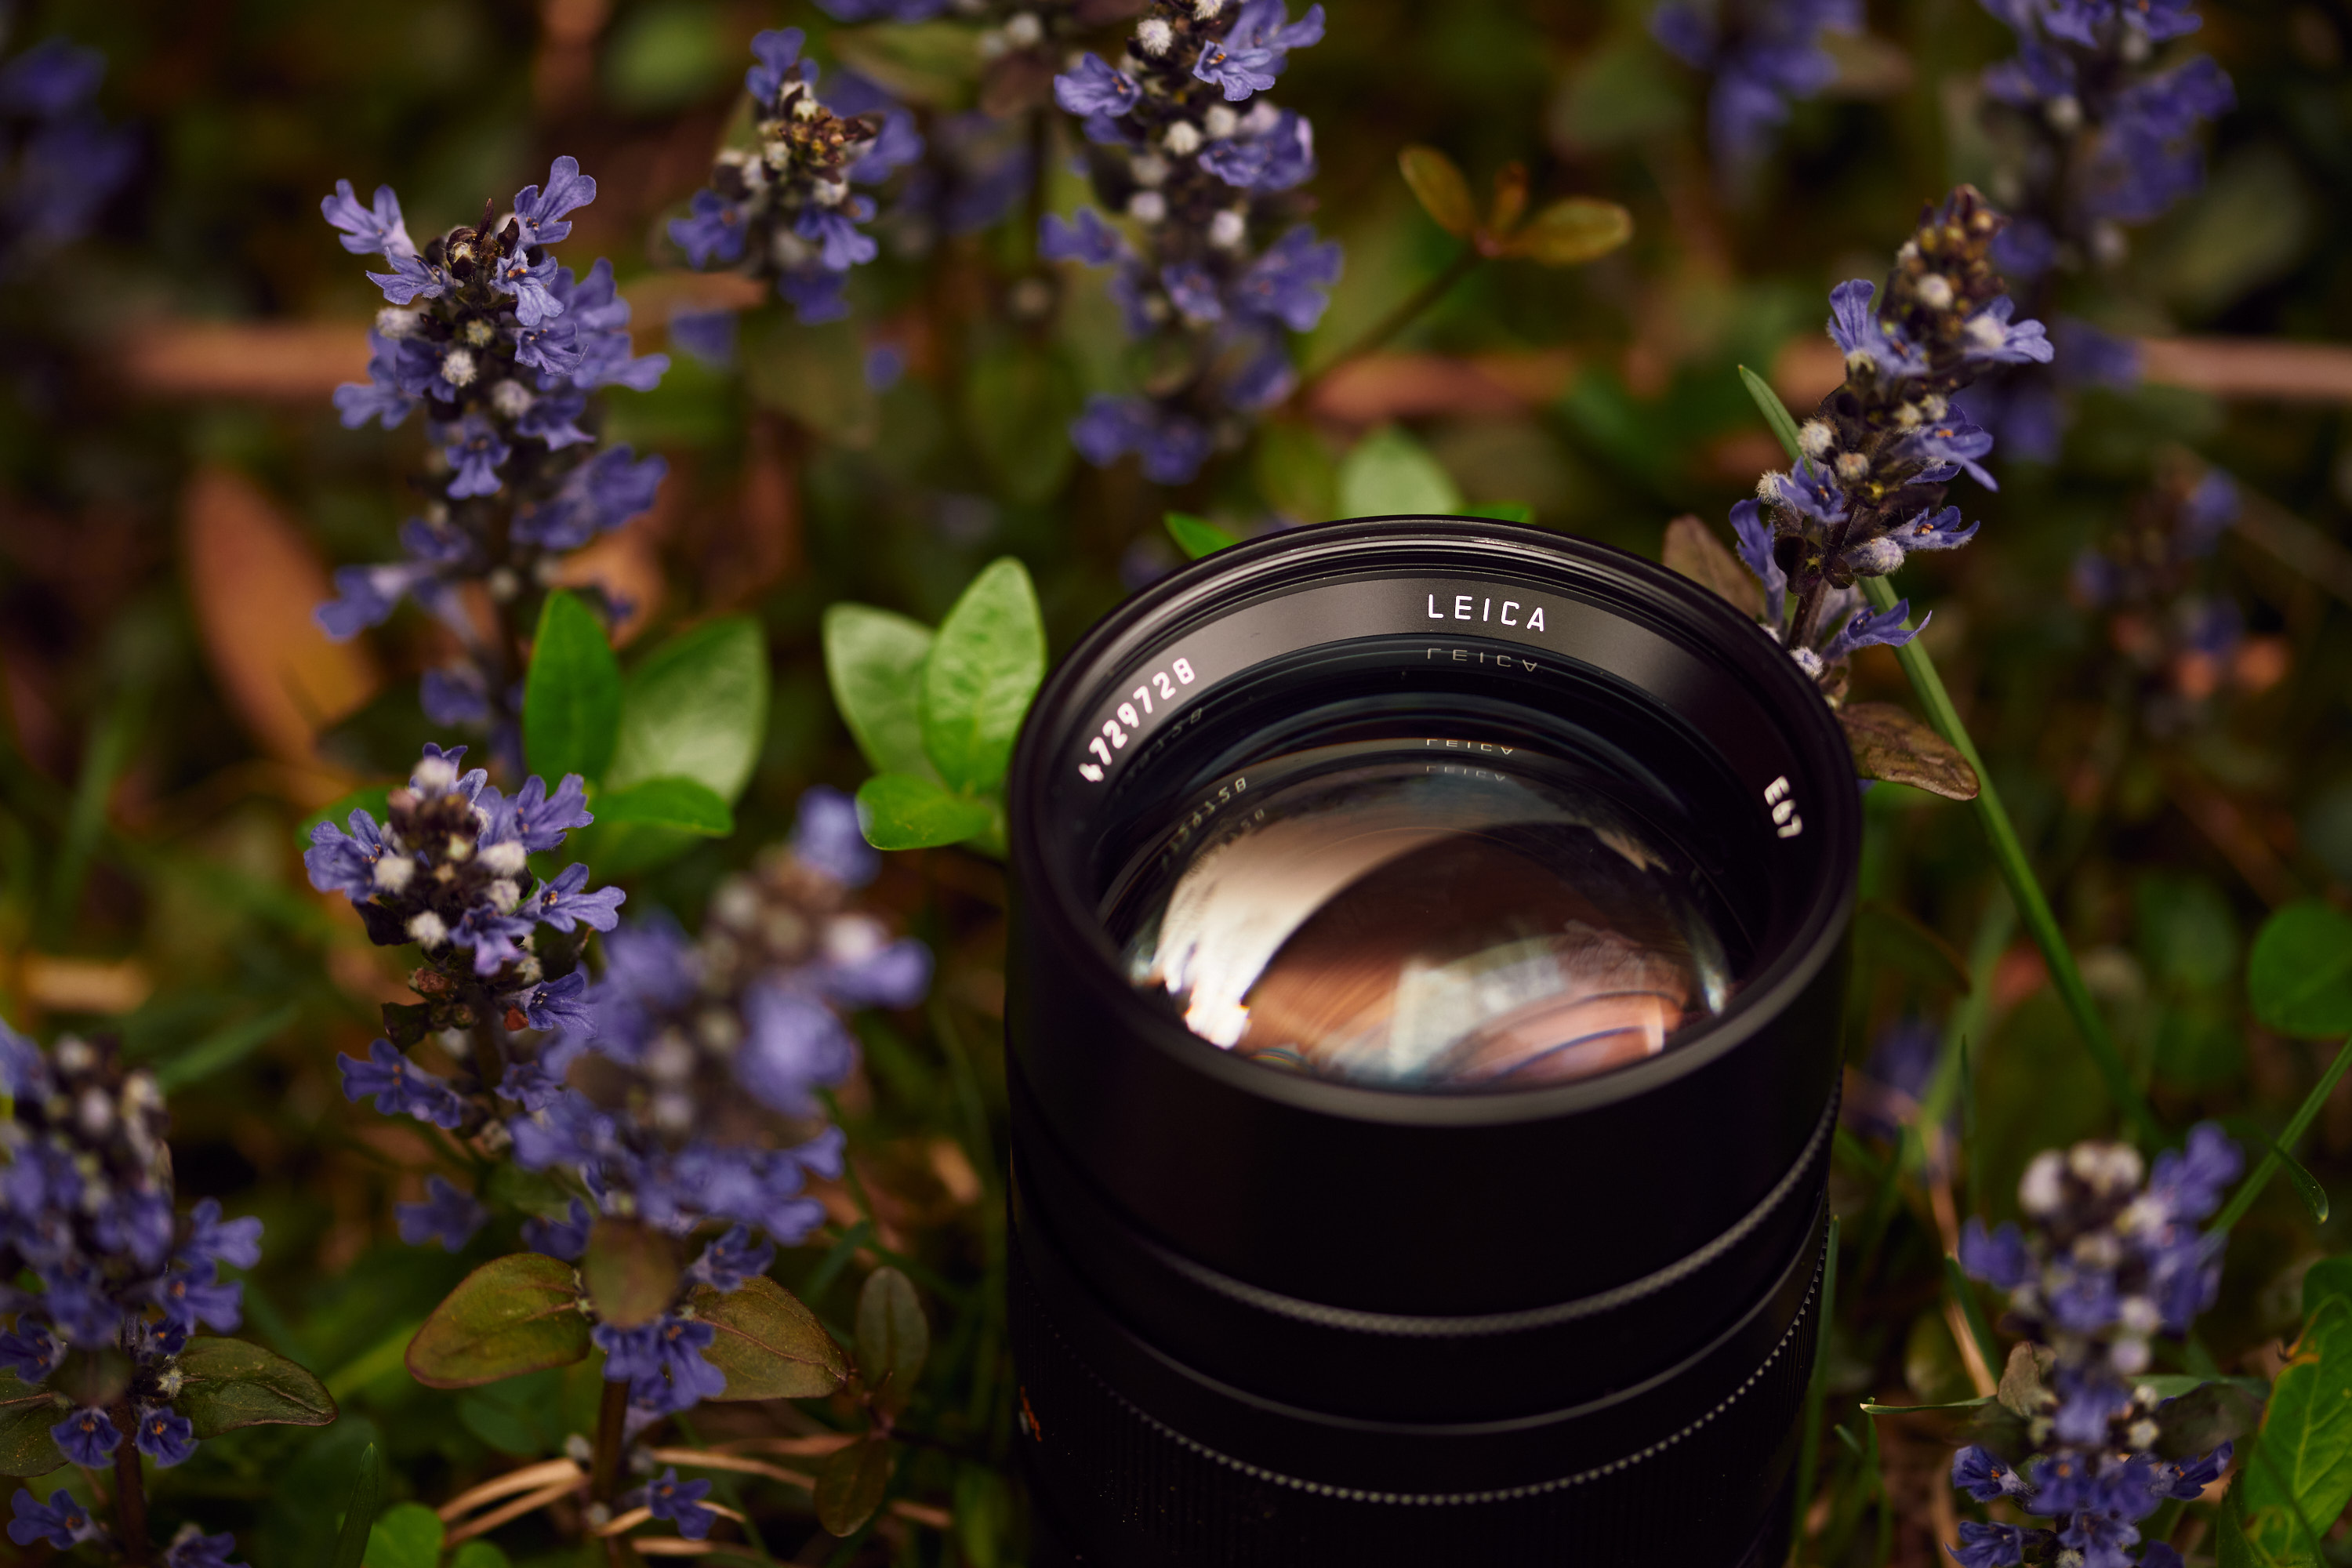 Challenging, but a Worthy Slice of Focus: Leica 90mm F1.5 Summilux ASPH